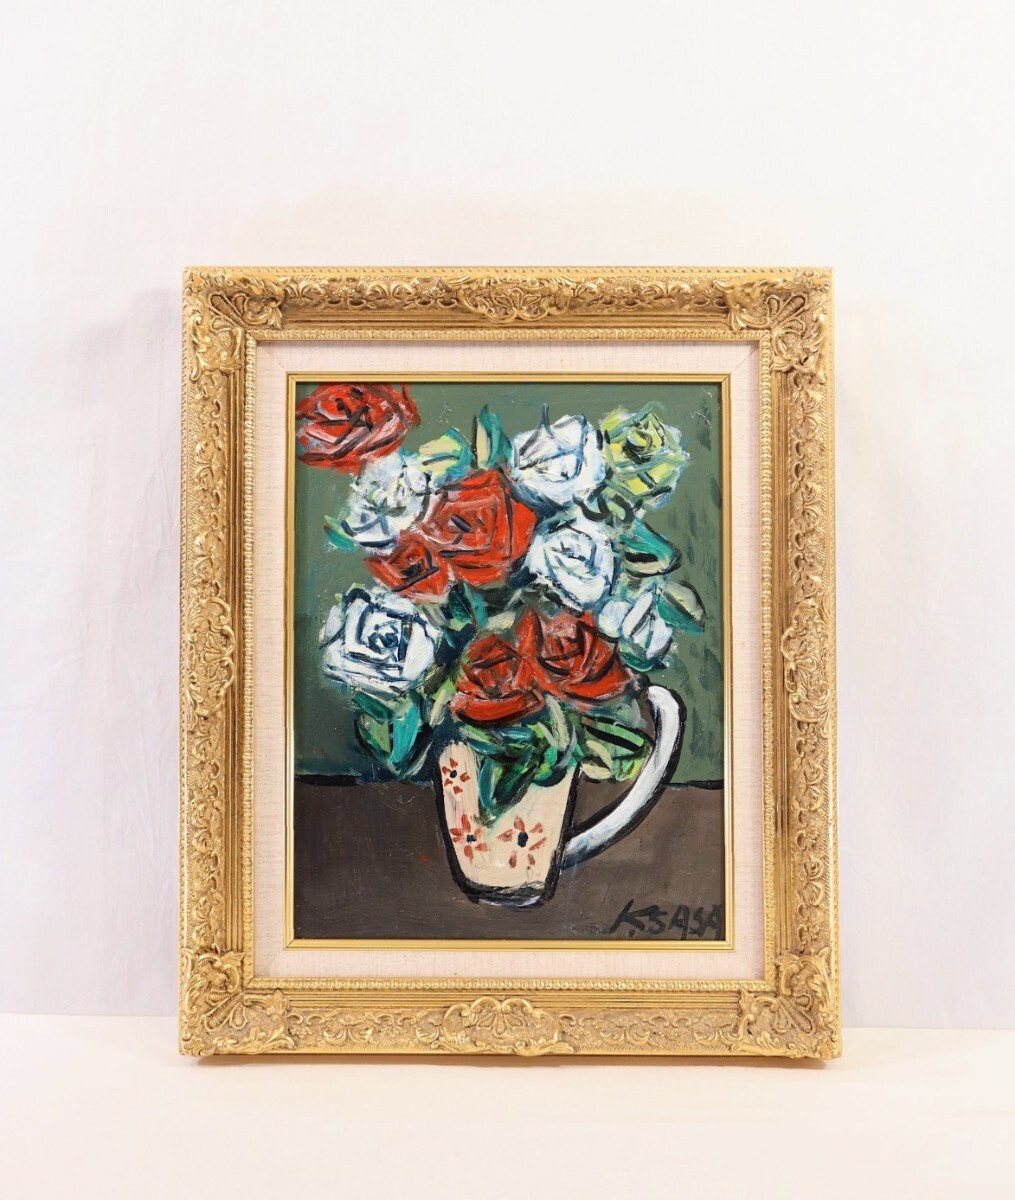  genuine work ... two 1988 year oil painting [ rose ]. size F6 Shizuoka prefecture .. new . fine art . member large . guarantee work next .... power strongly .... writing brush ., life power feeling . rose. flower 8729